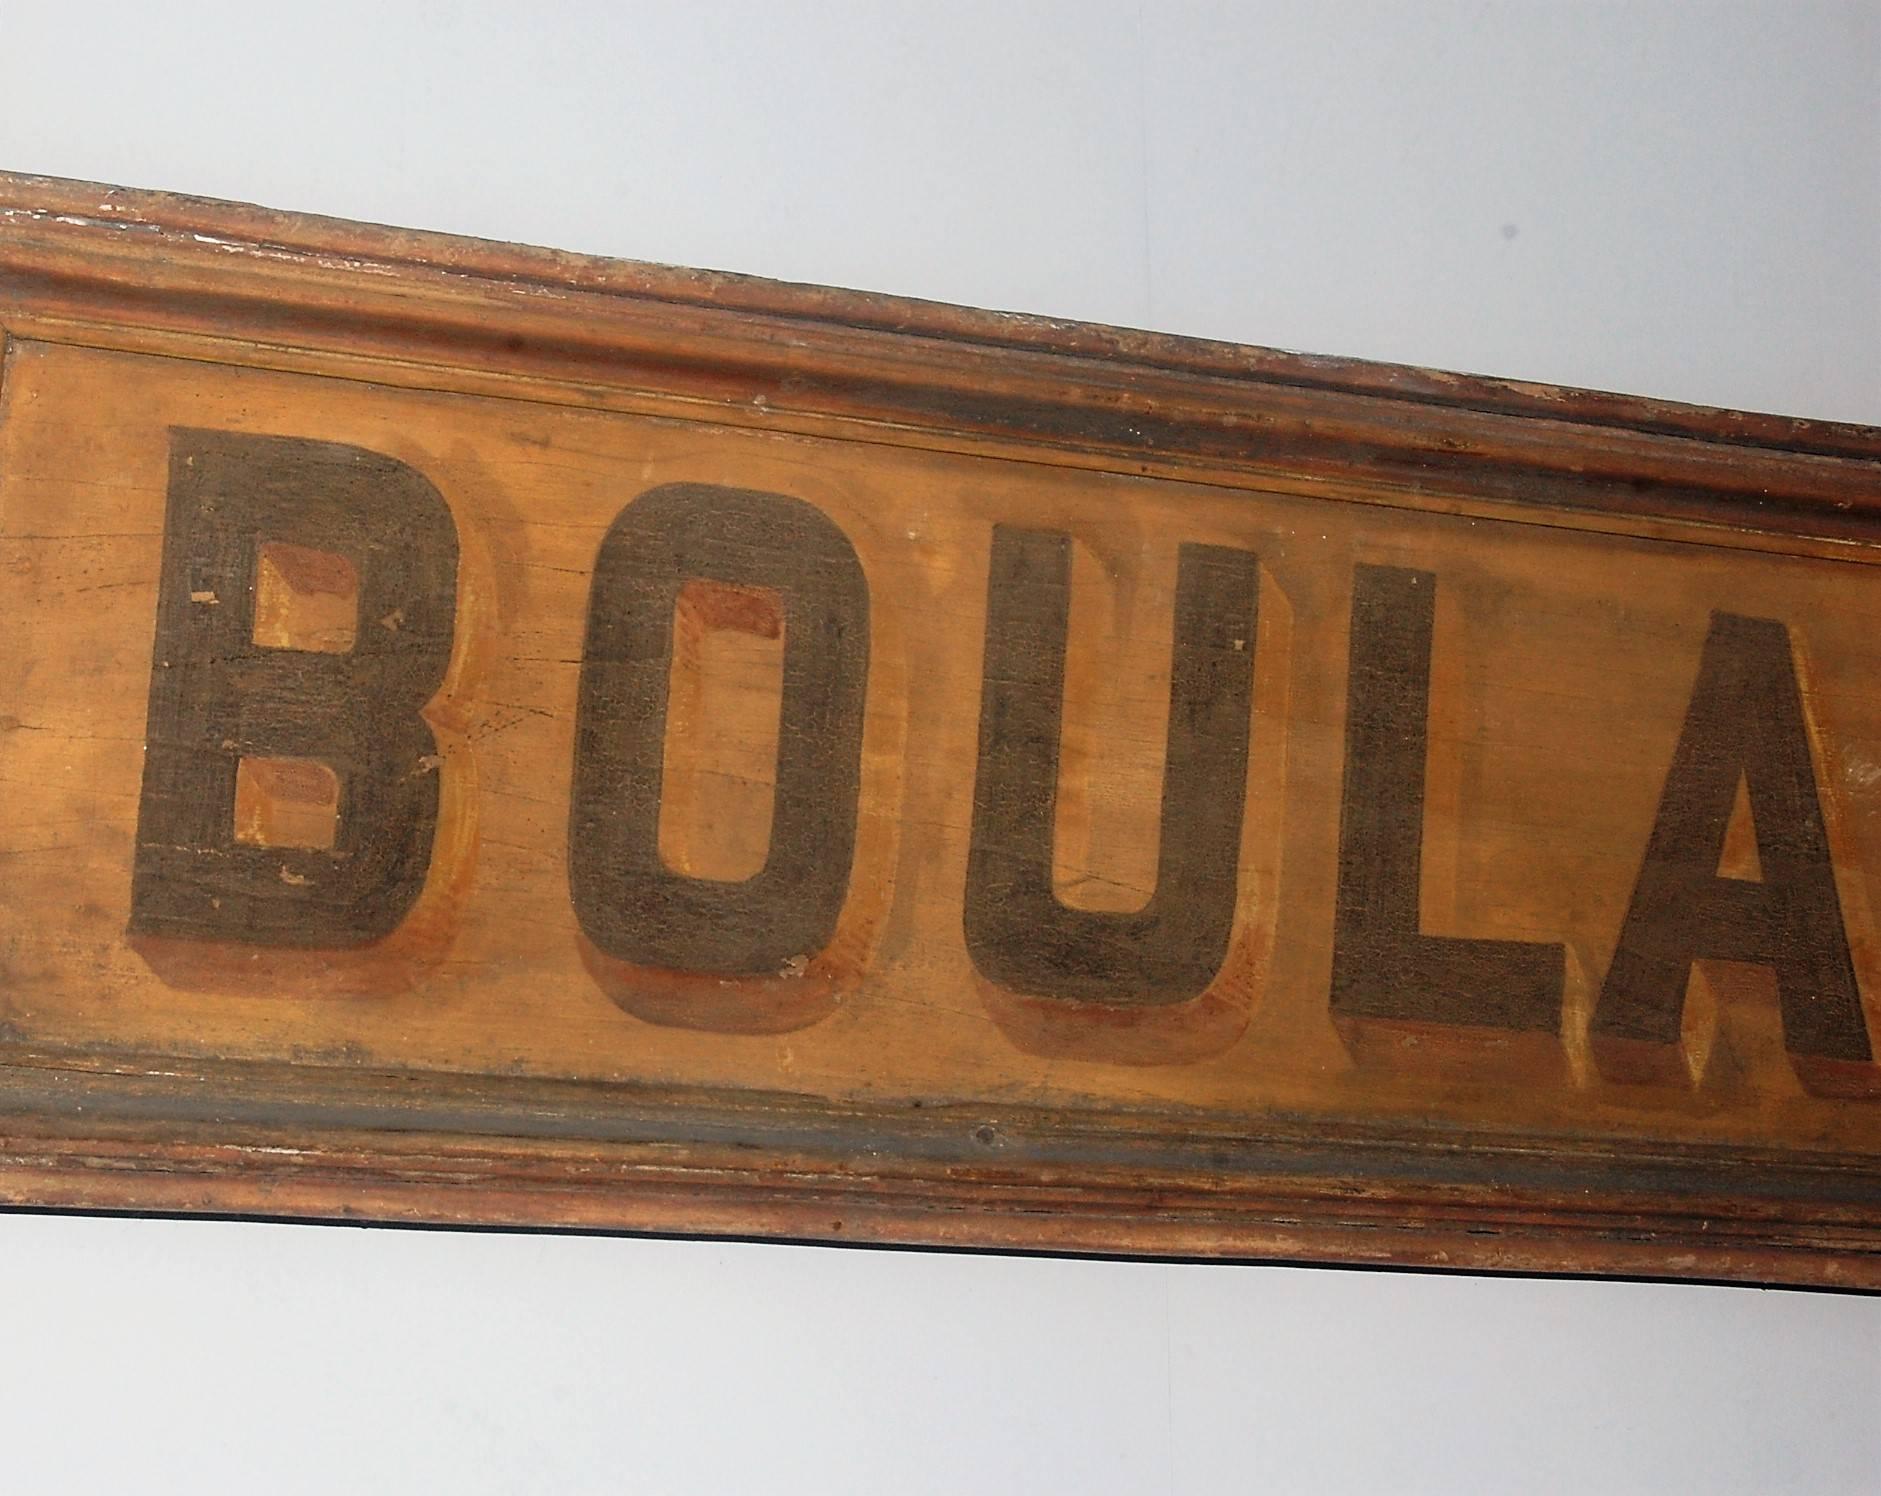 Exceptional example of a totally original mid-19th century French Boulangerie (Bakers) trade sign, hand-painted on timber, Original dry faded finish with light craquelure to the surface, and minor paint loss in places, French, circa 1850.